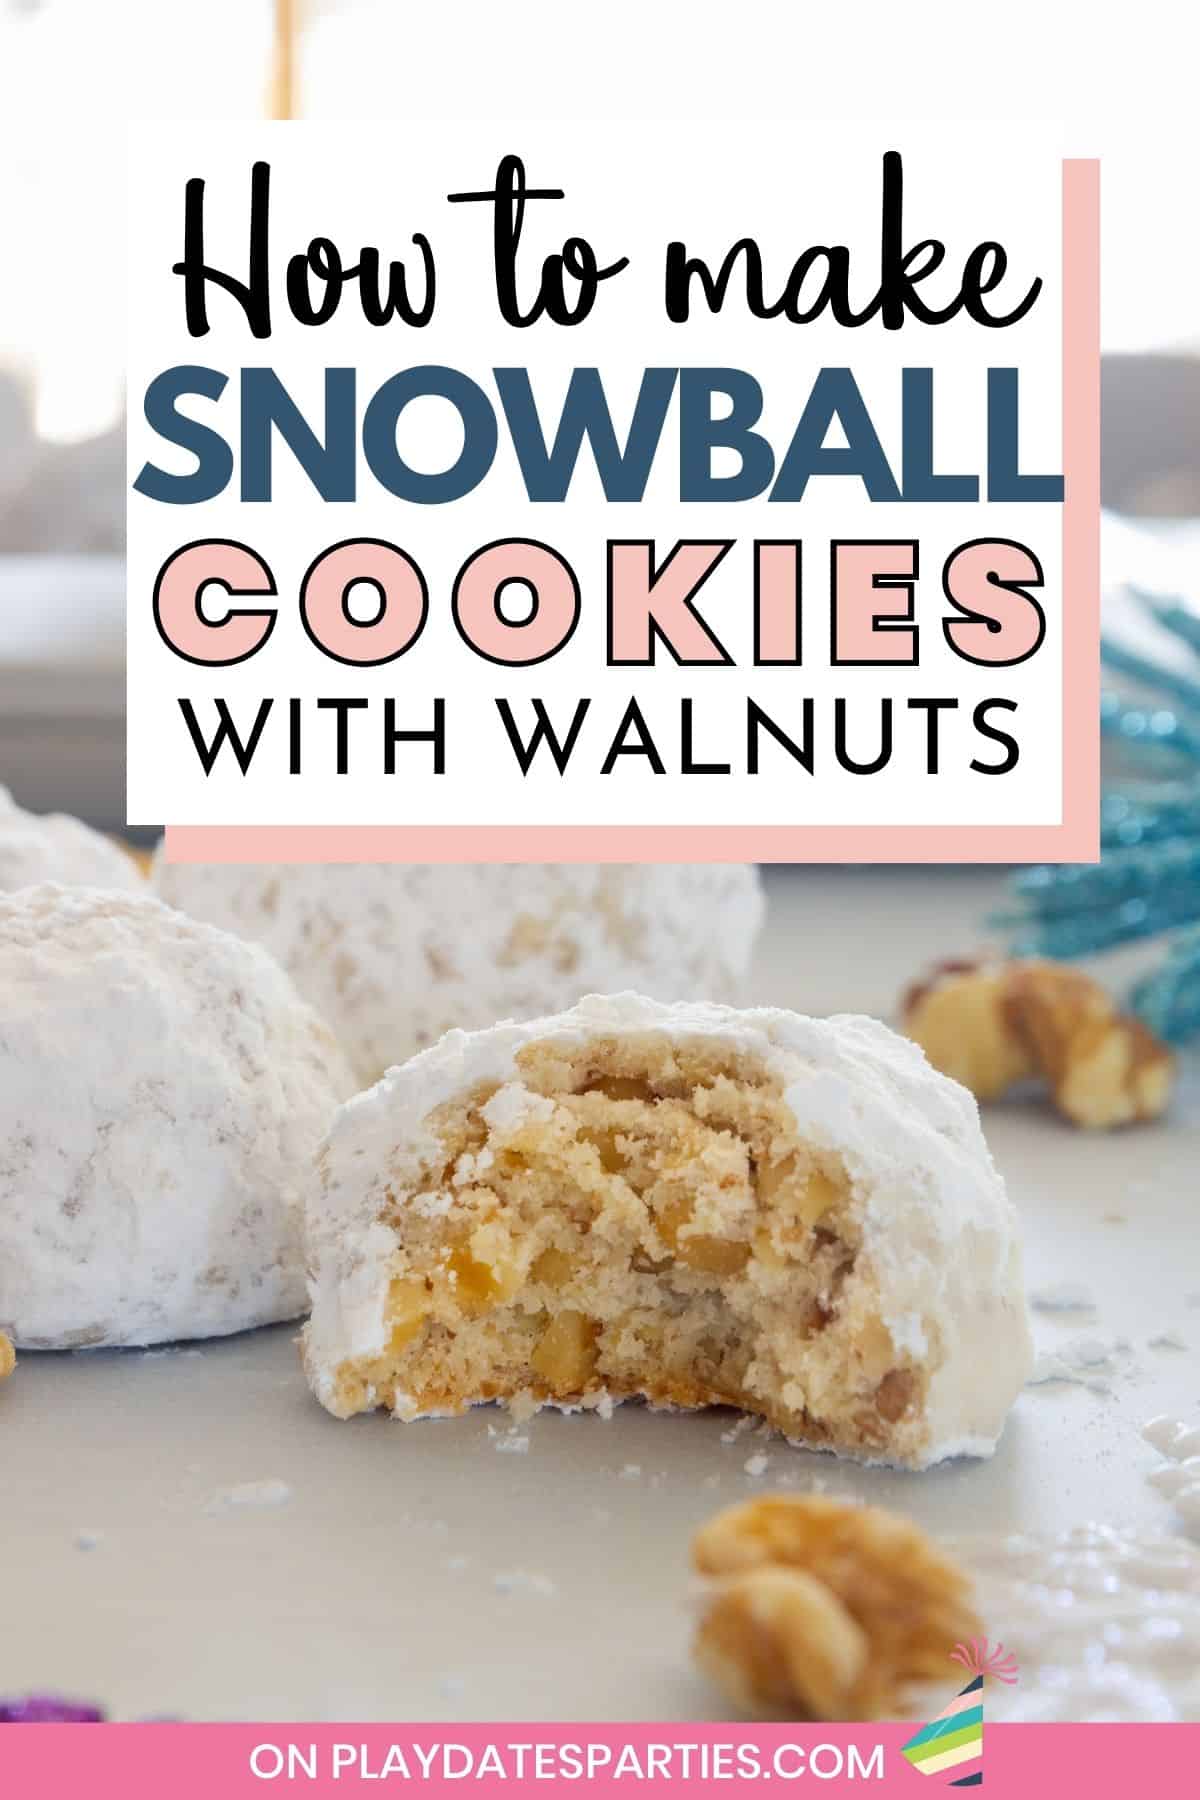 How to make snowball cookies with walnuts pin image